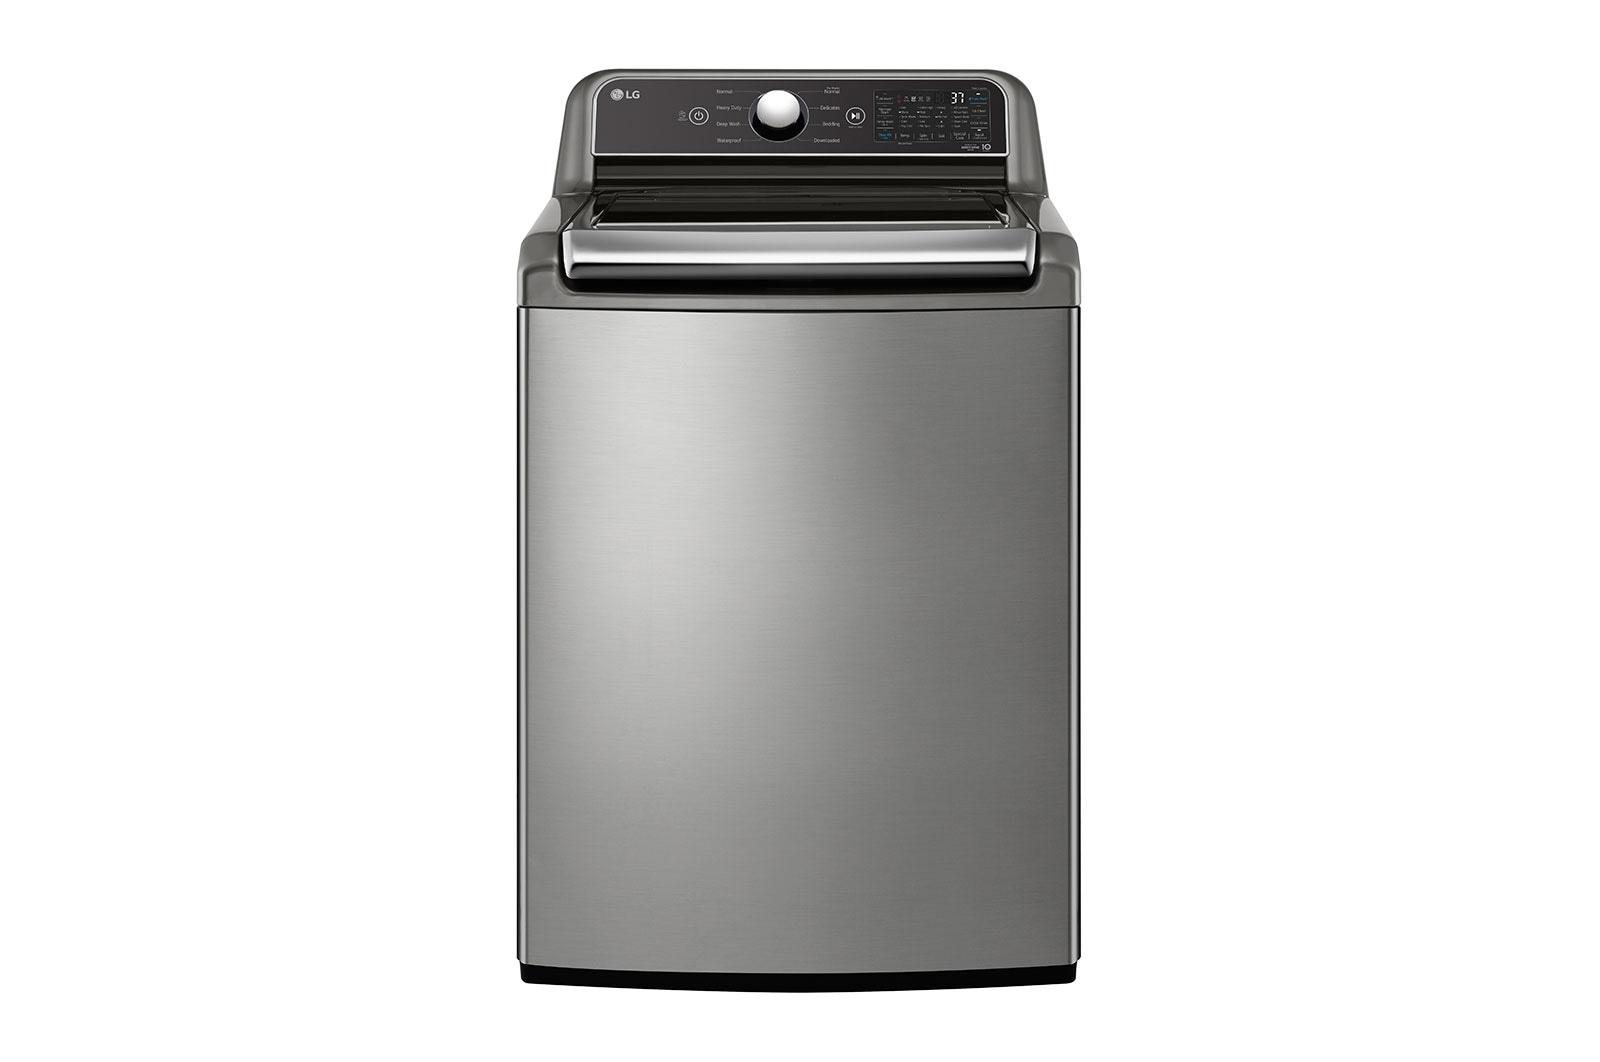 WT6105CW LG Appliances 4.1 cu. ft. Top Load Washer with 4-Way